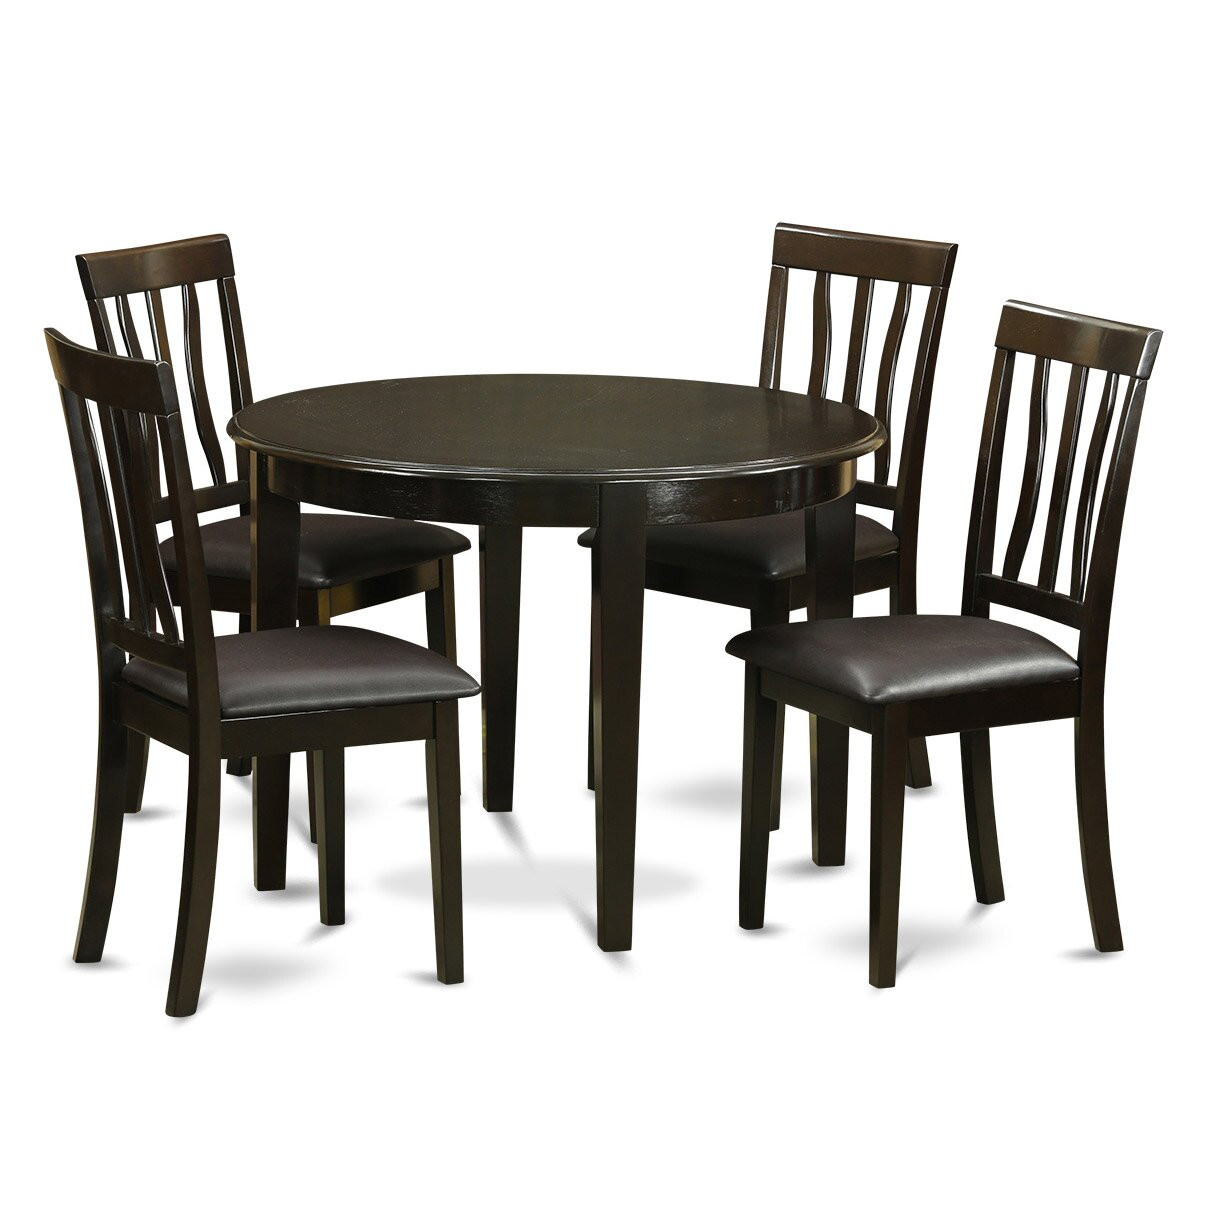 Wayfair Small Kitchen Tables
 Wooden Importers Boston 5 Piece Dining Set